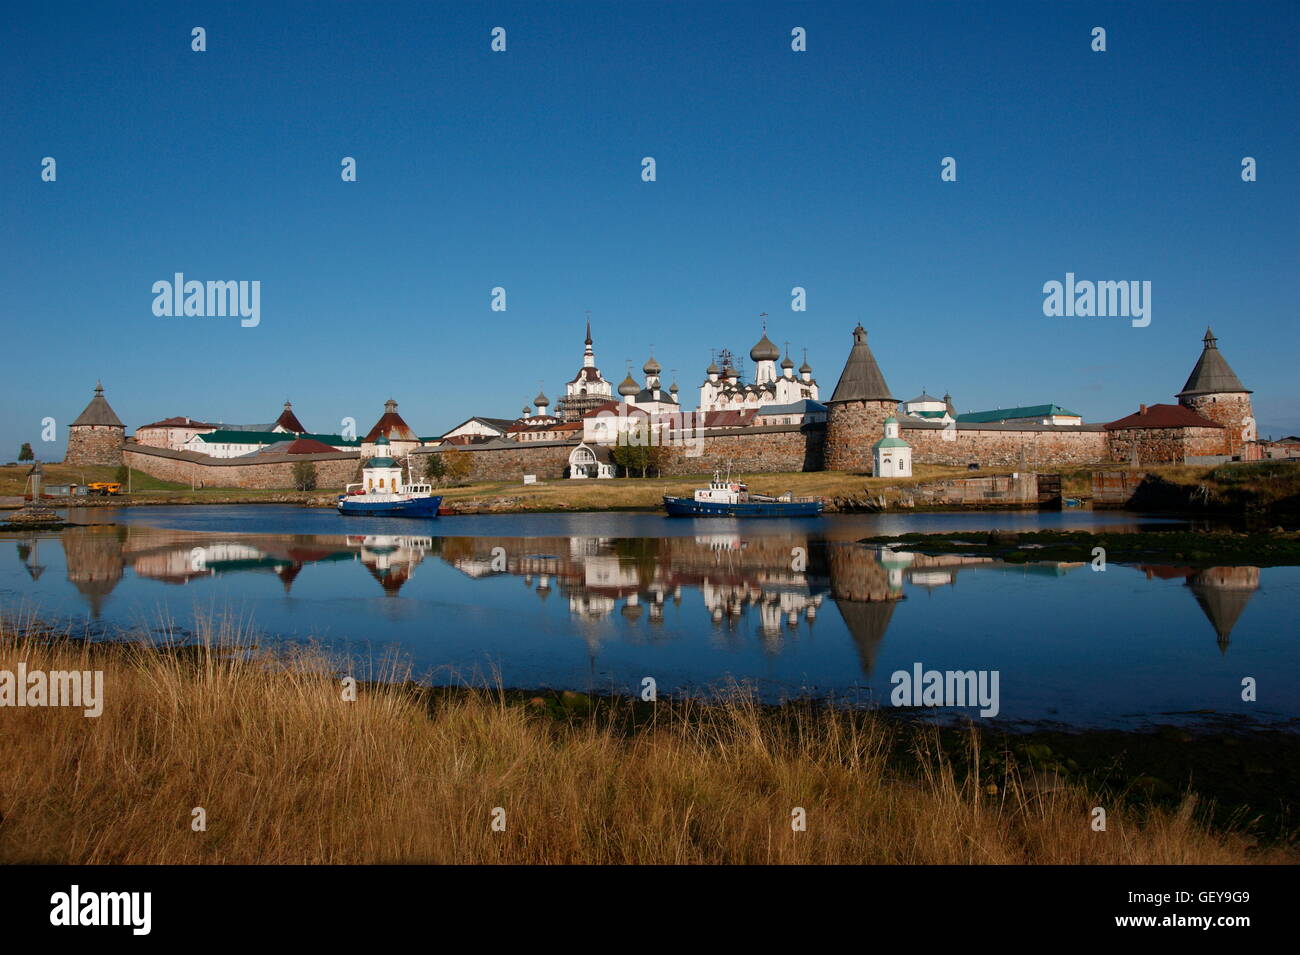 geography / travel, Russia, Solovetsky Islands, Solovetsky kremlin, wall and defence towers, cathedral, Stock Photo